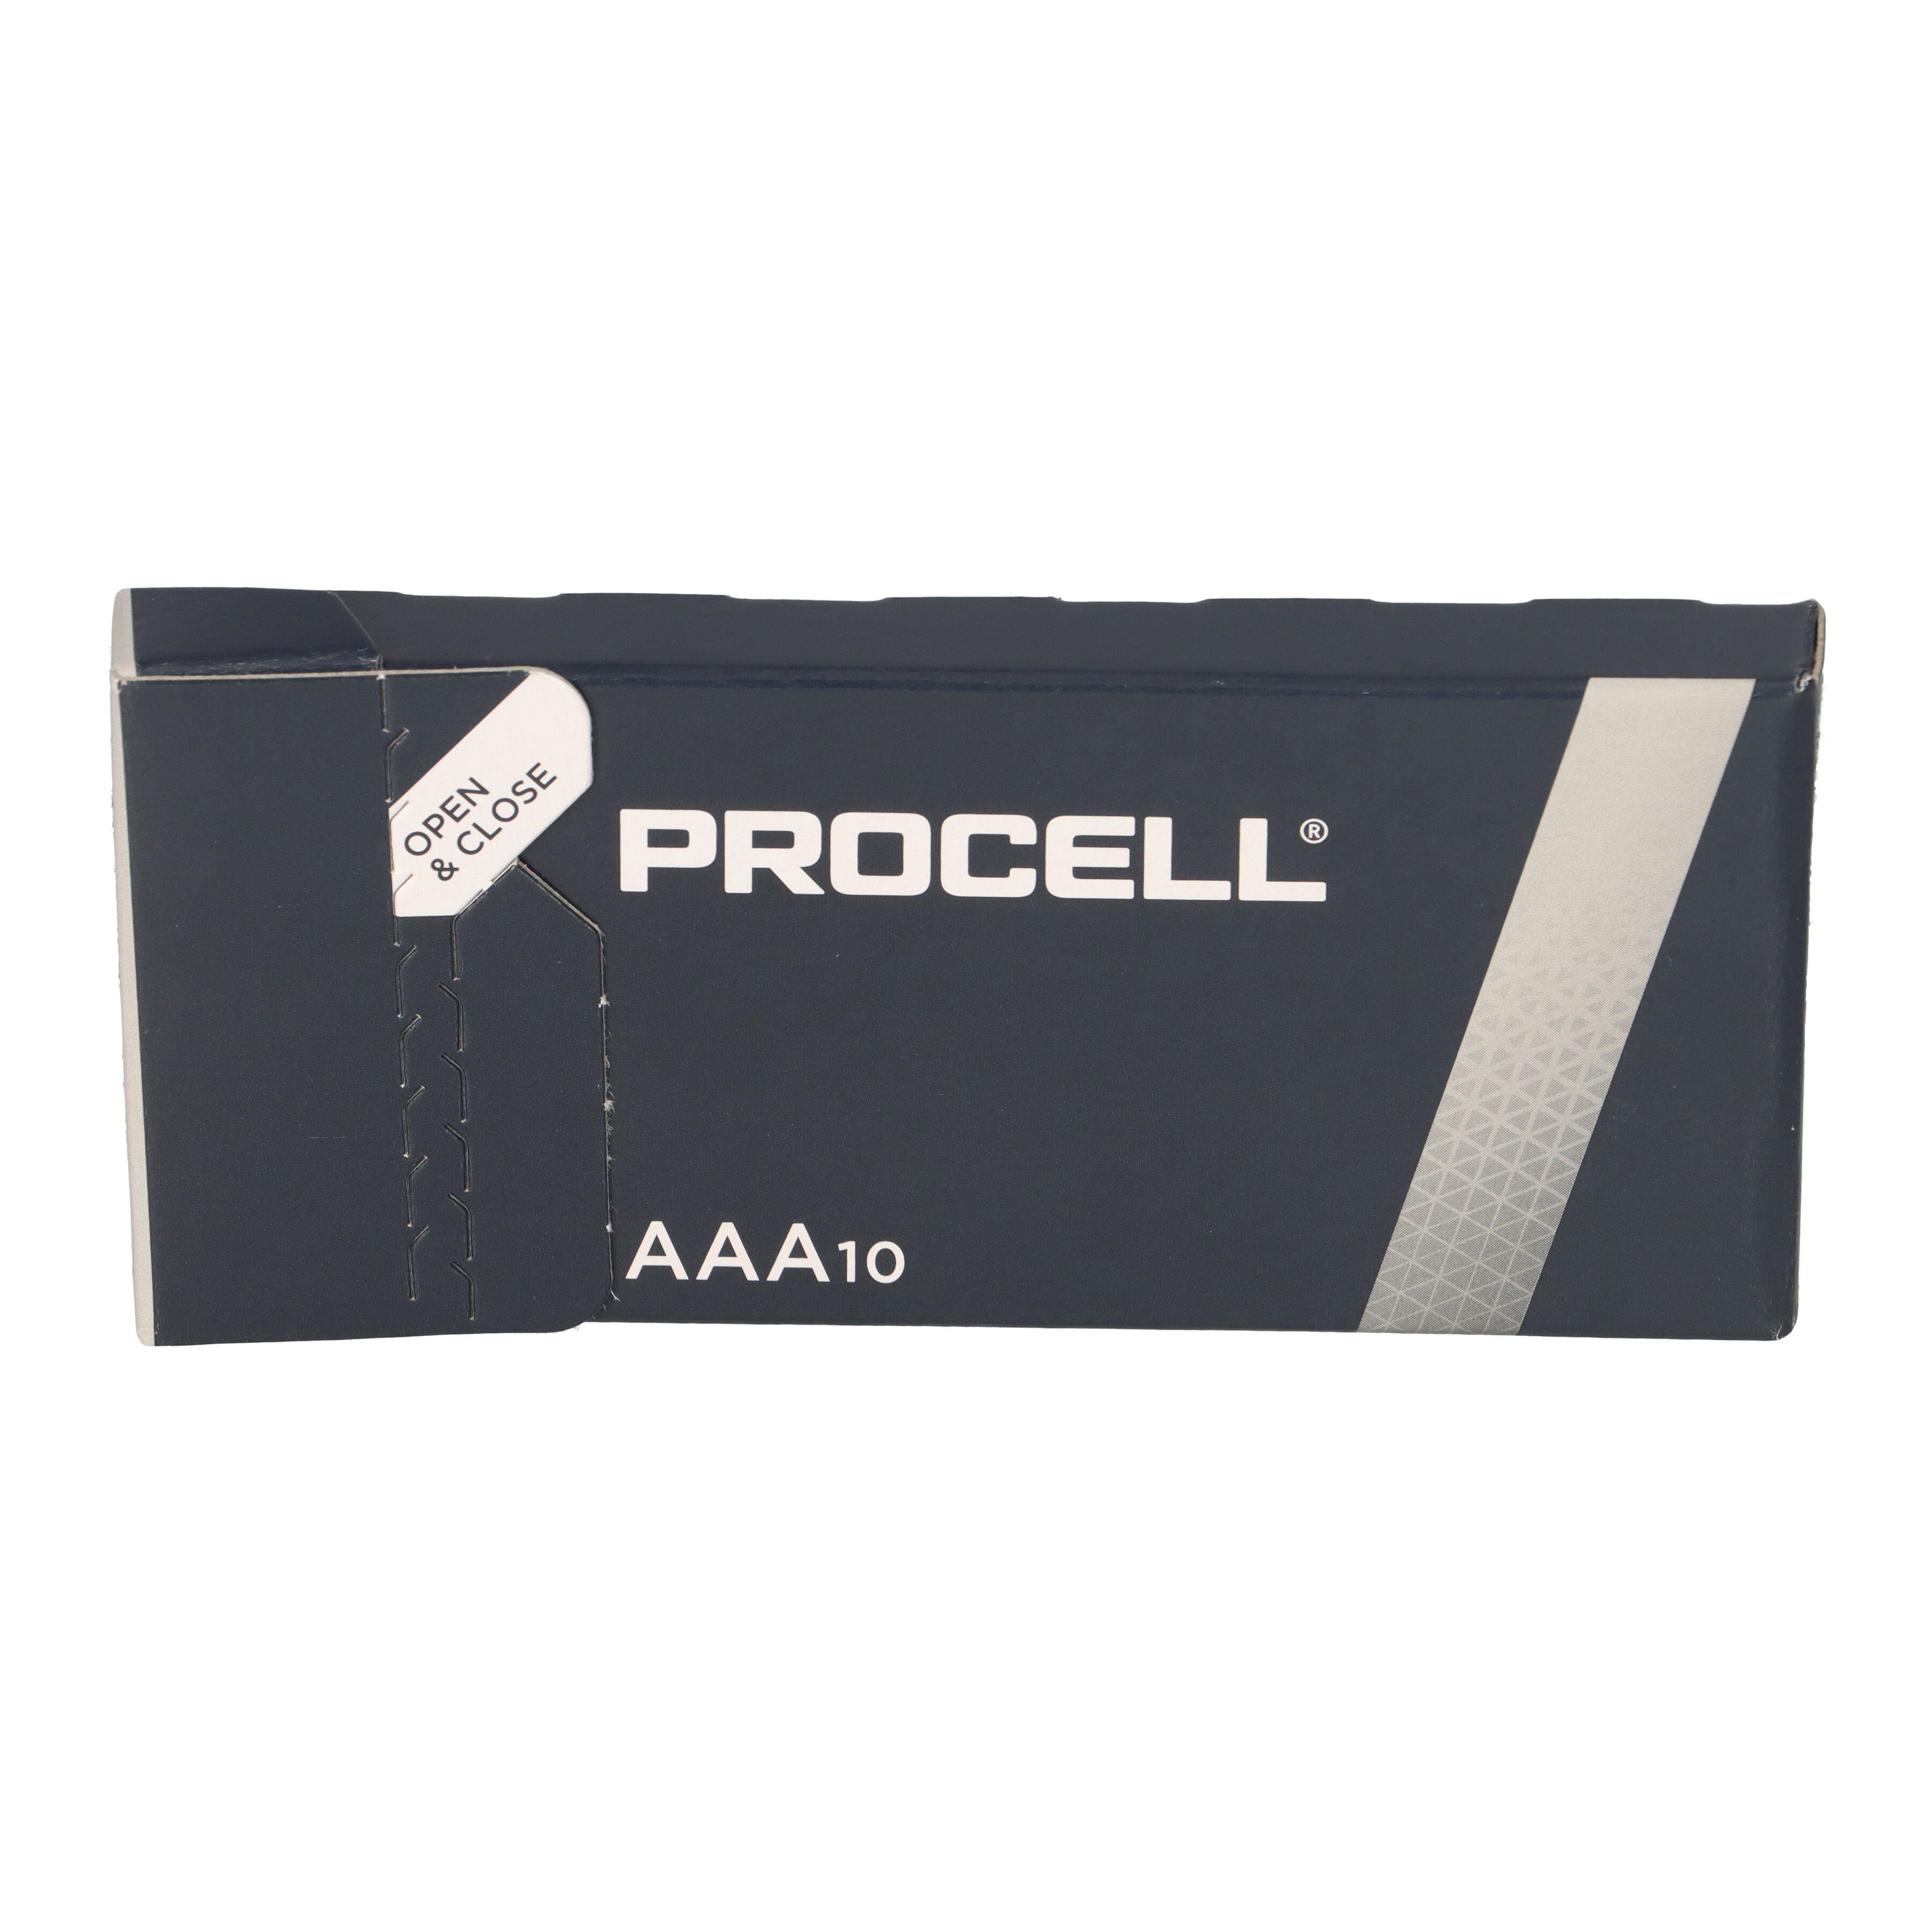 Duracell 200x Procell MN2400 AAA Micro Batterie Batterie